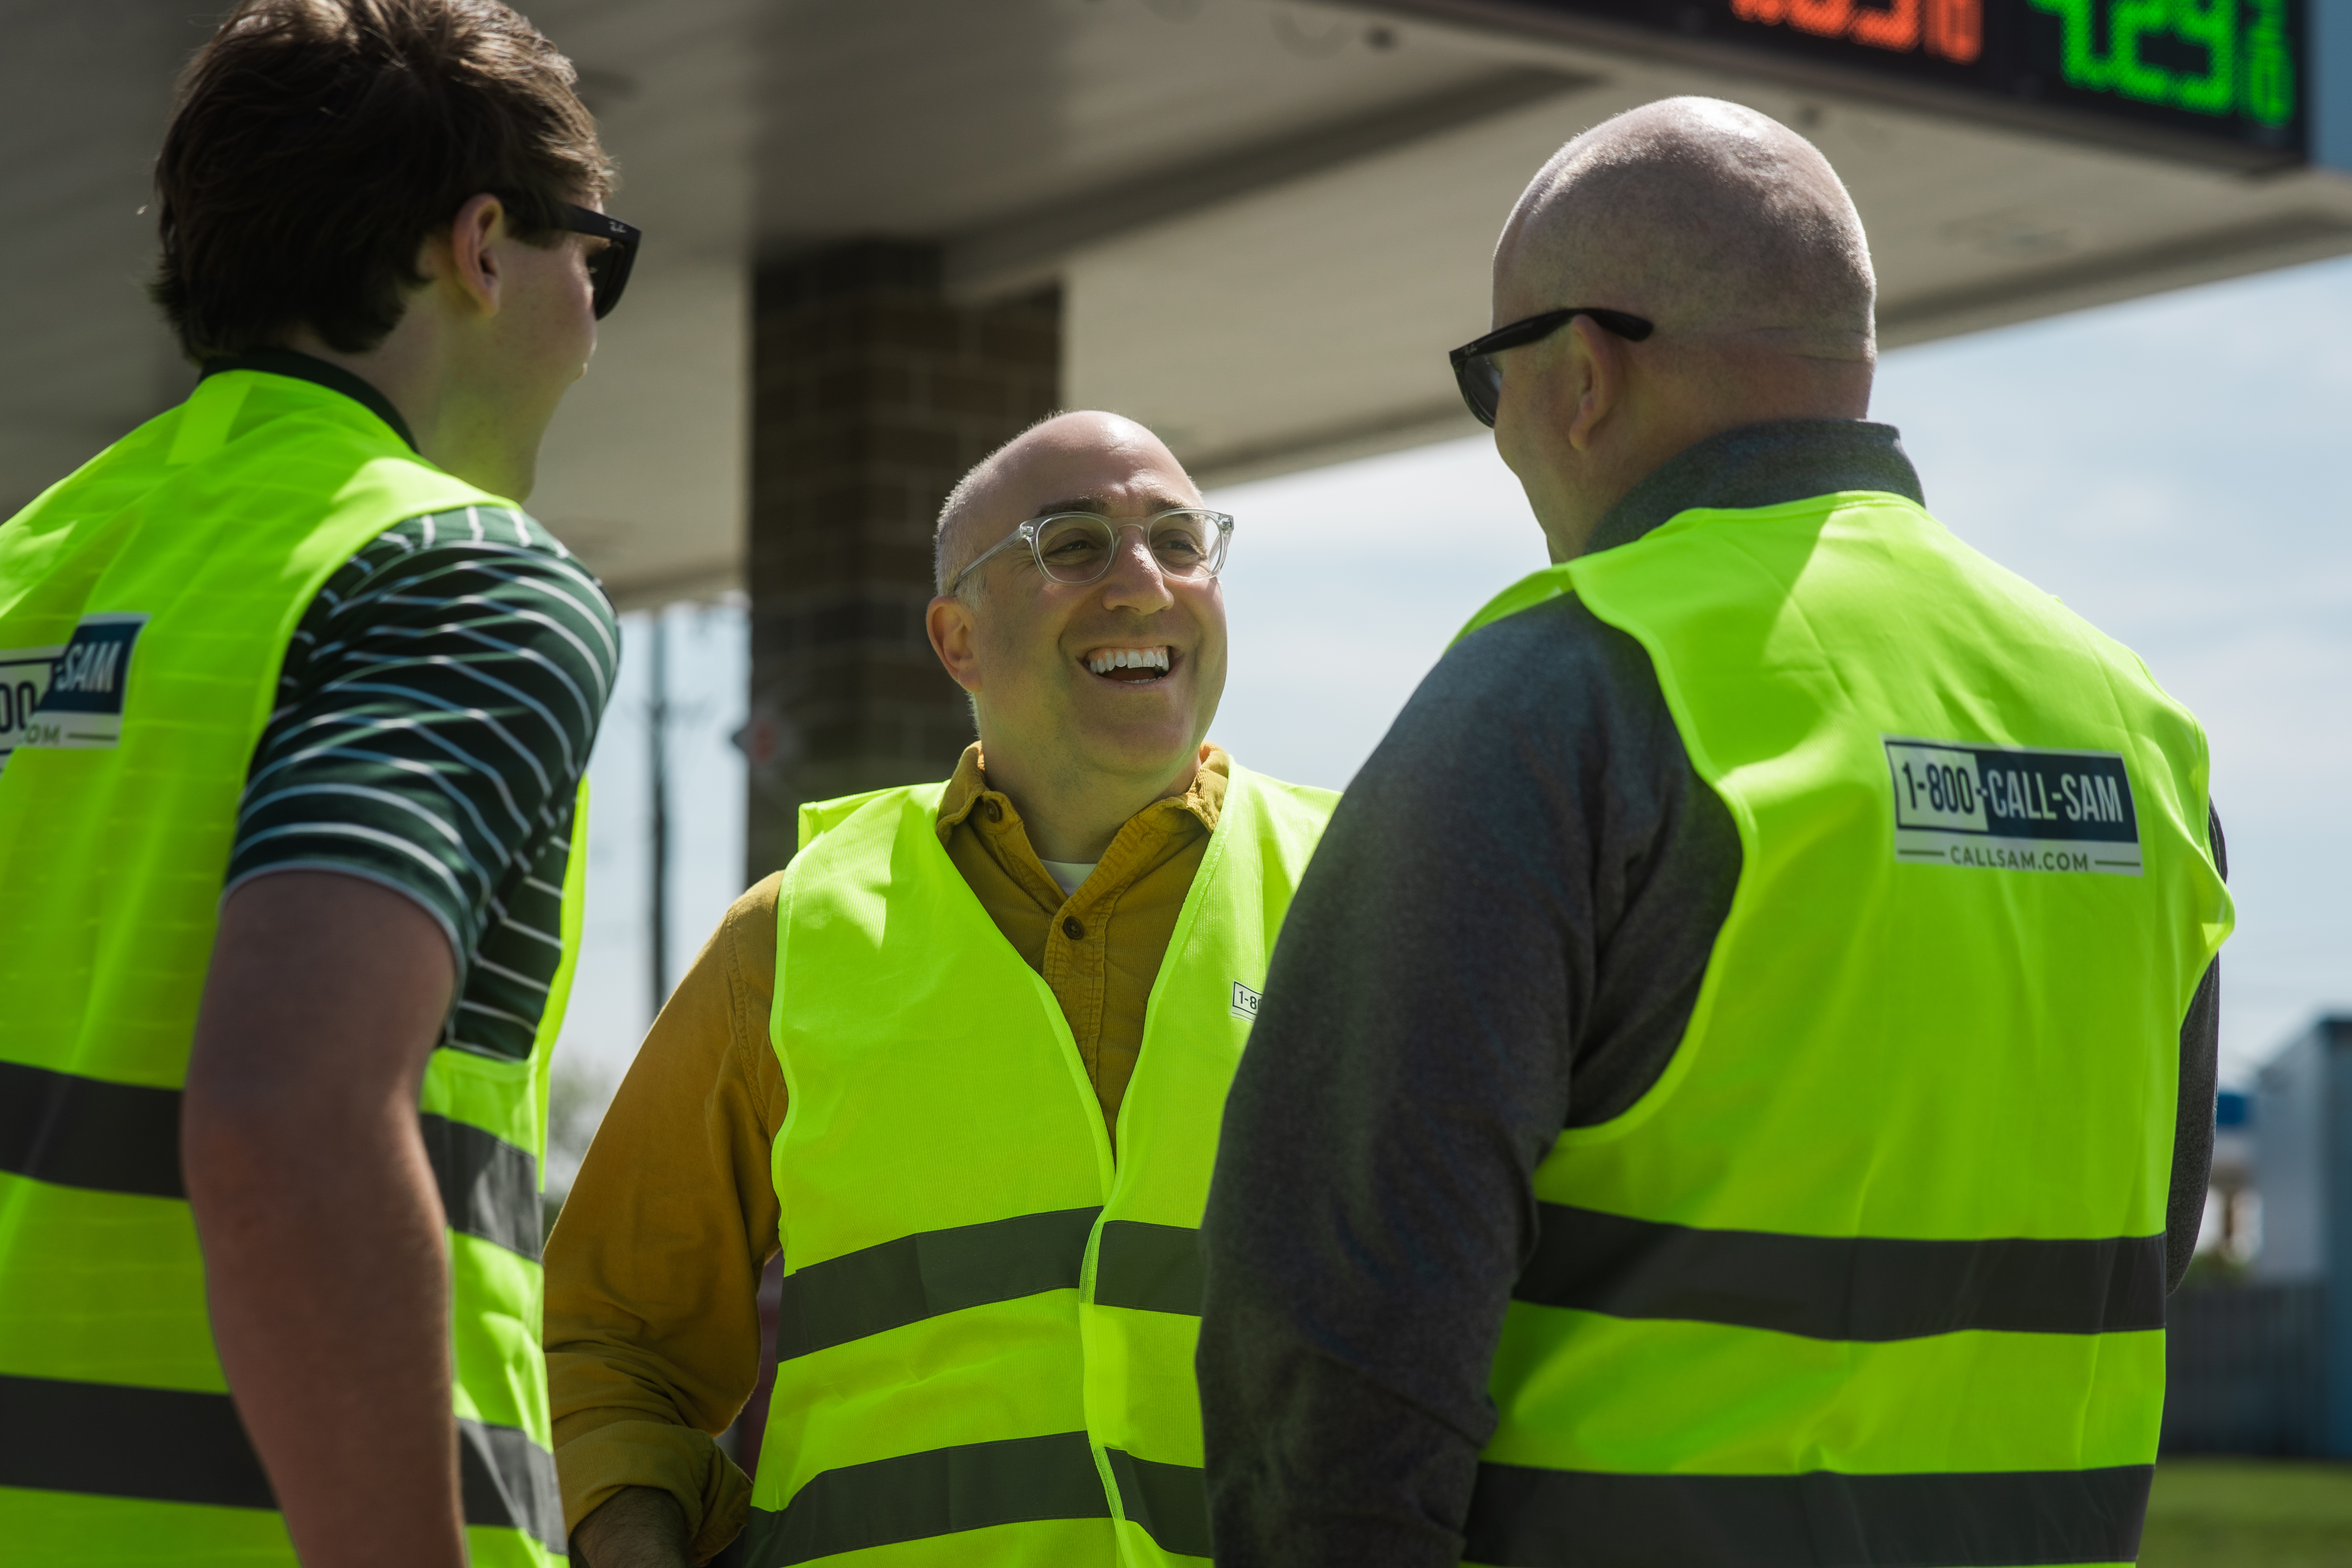 Mark Bernstein talking to another volunteer wearing high visual safety vests that read 1-800-CALL-SAM on the back of them